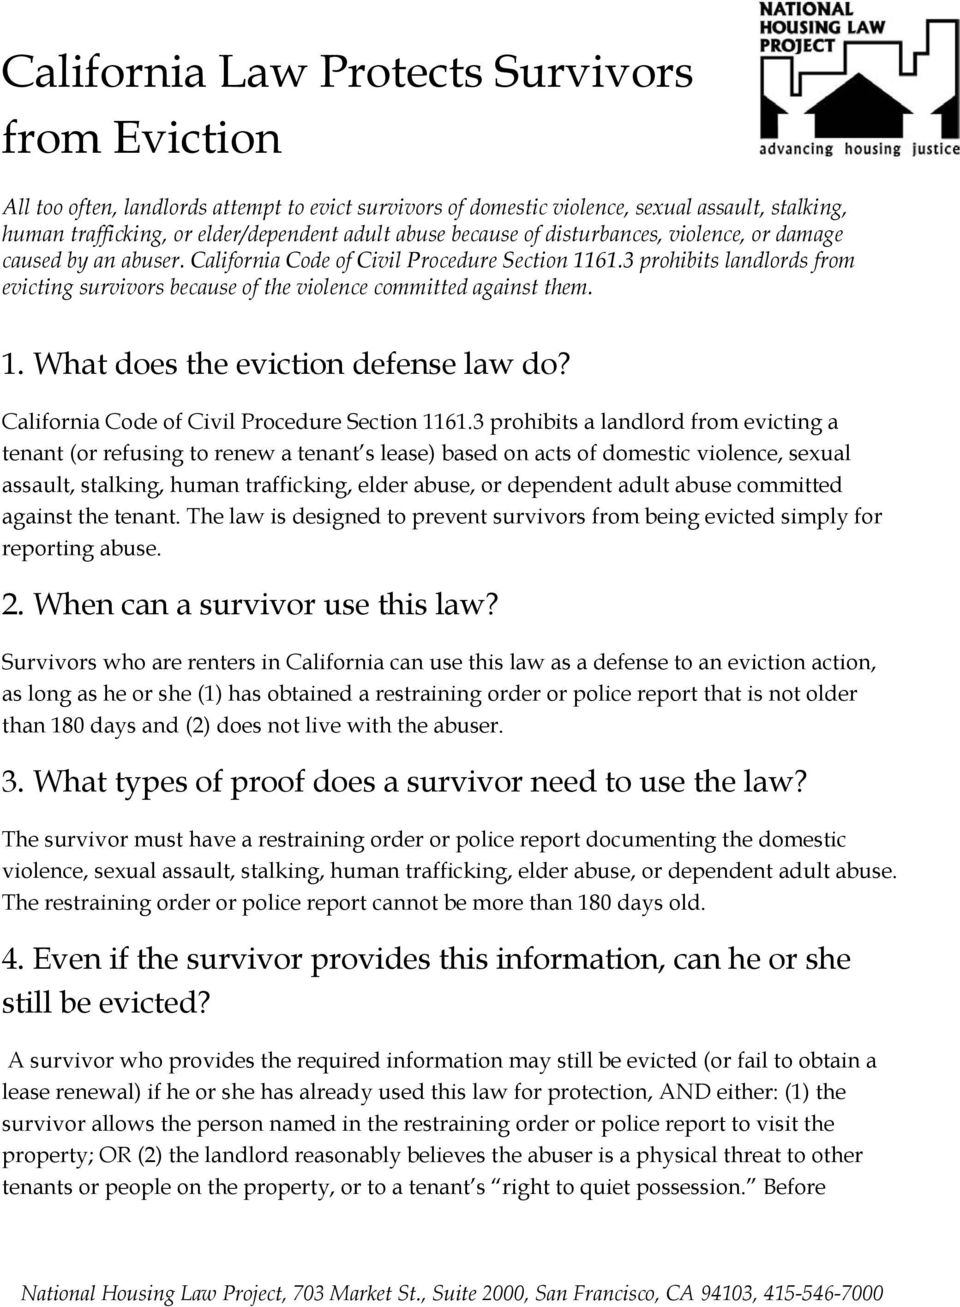 3 prohibits landlords from evicting survivors because of the violence committed against them. 1. What does the eviction defense law do? California Code of Civil Procedure Section 1161.